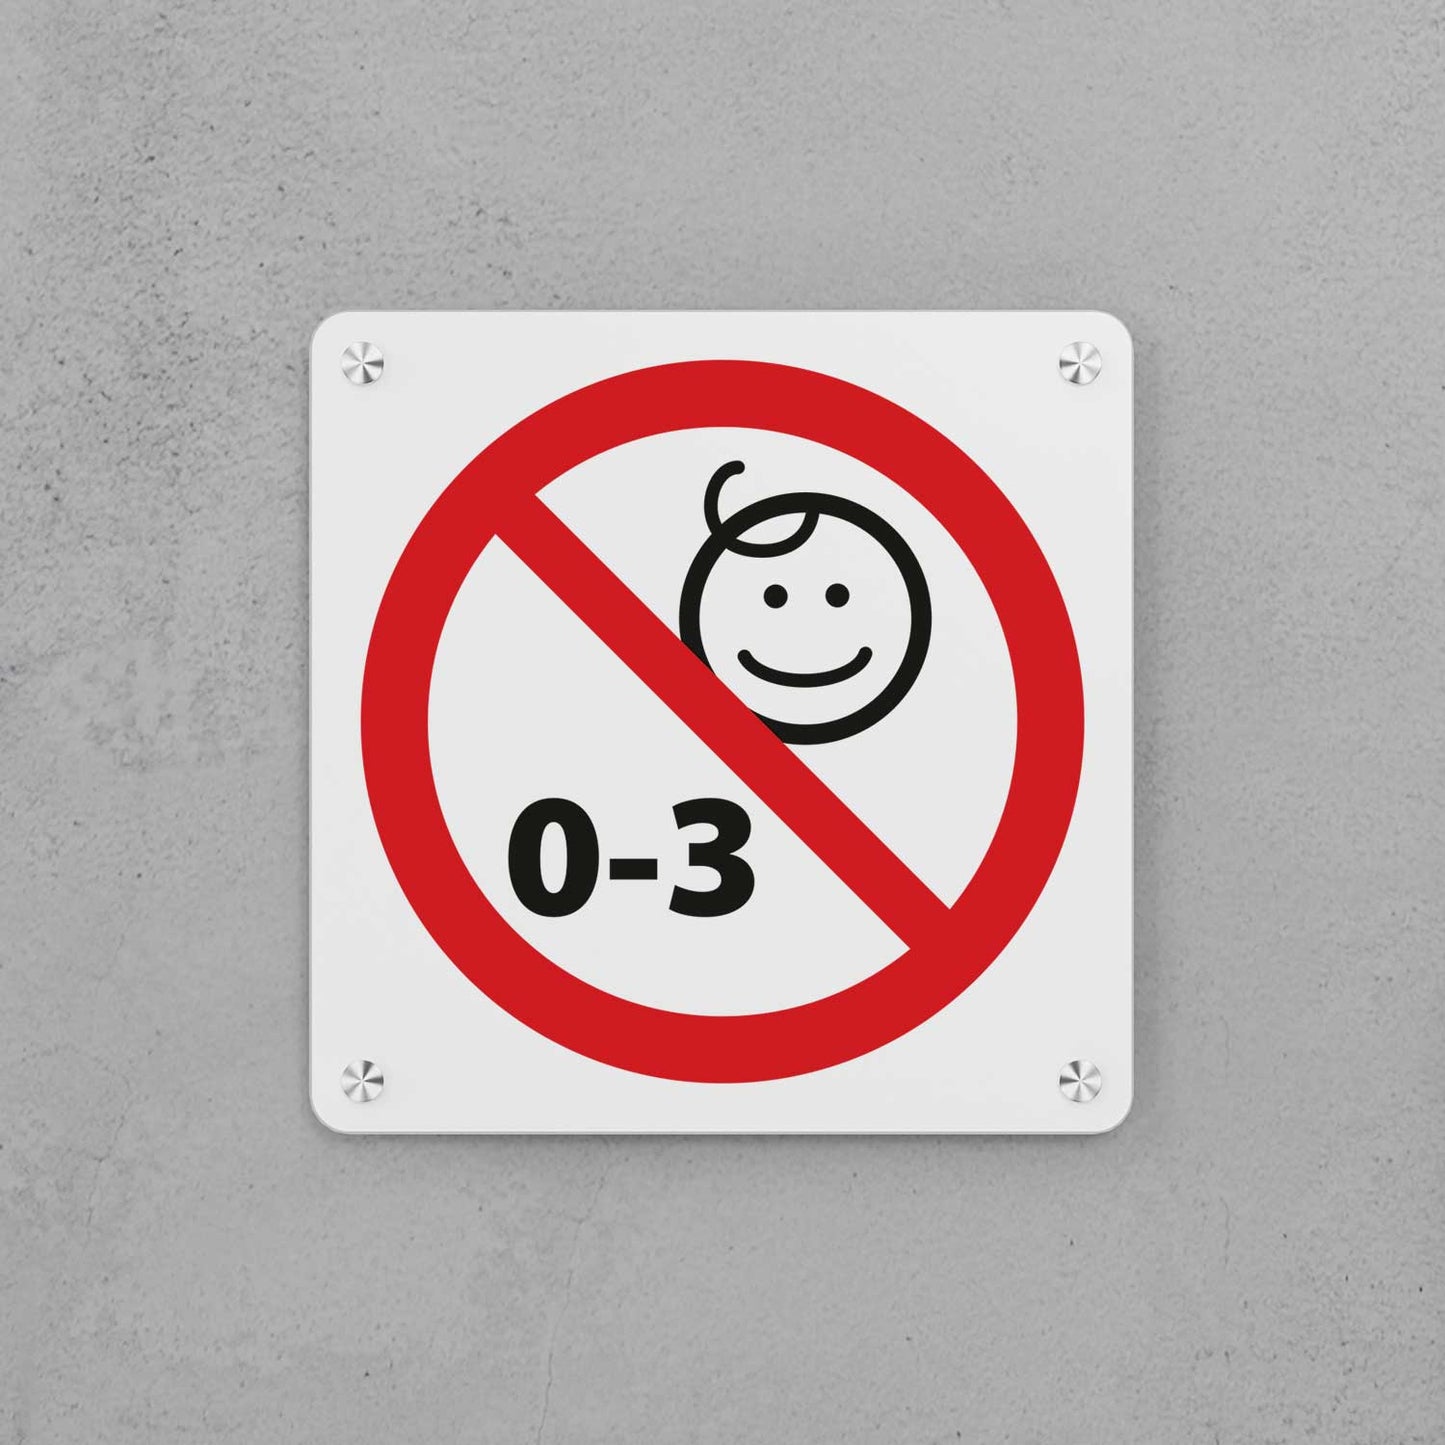 No Babies Allowed Sign